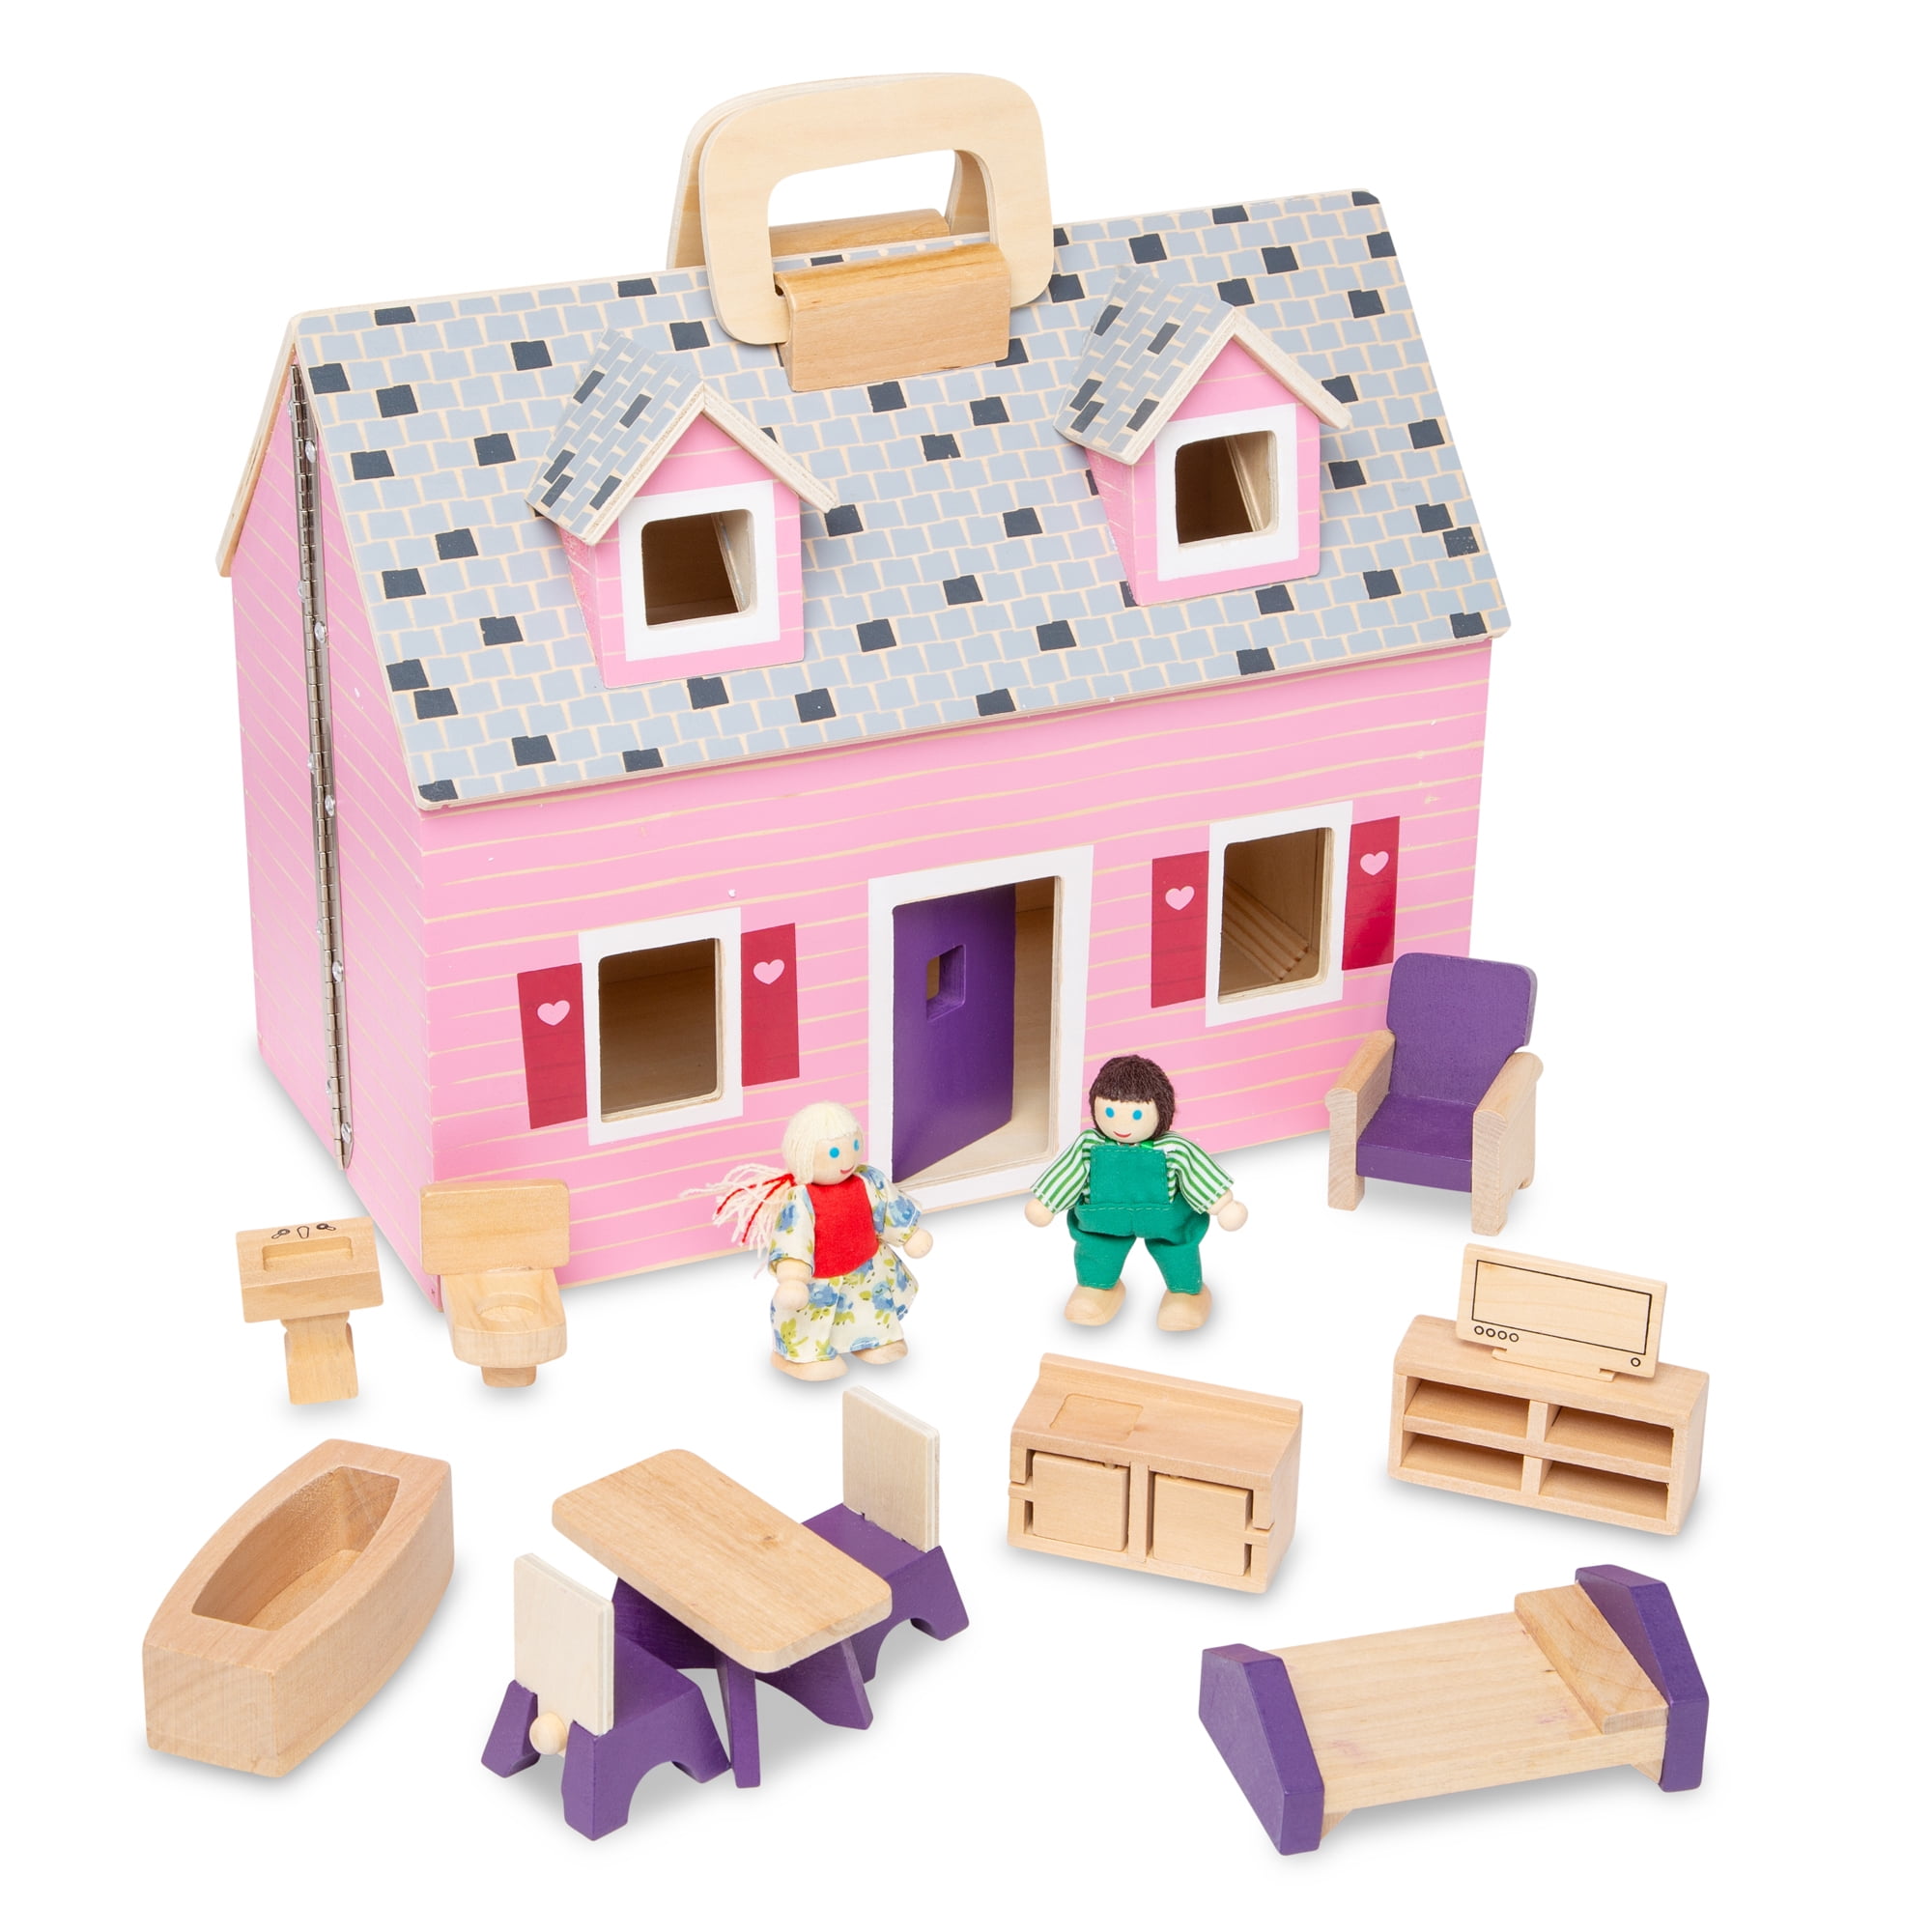 Details about   Melissa & Doug Fold and Go Wooden Dollhouse With 2 Dolls and Wooden Furniture